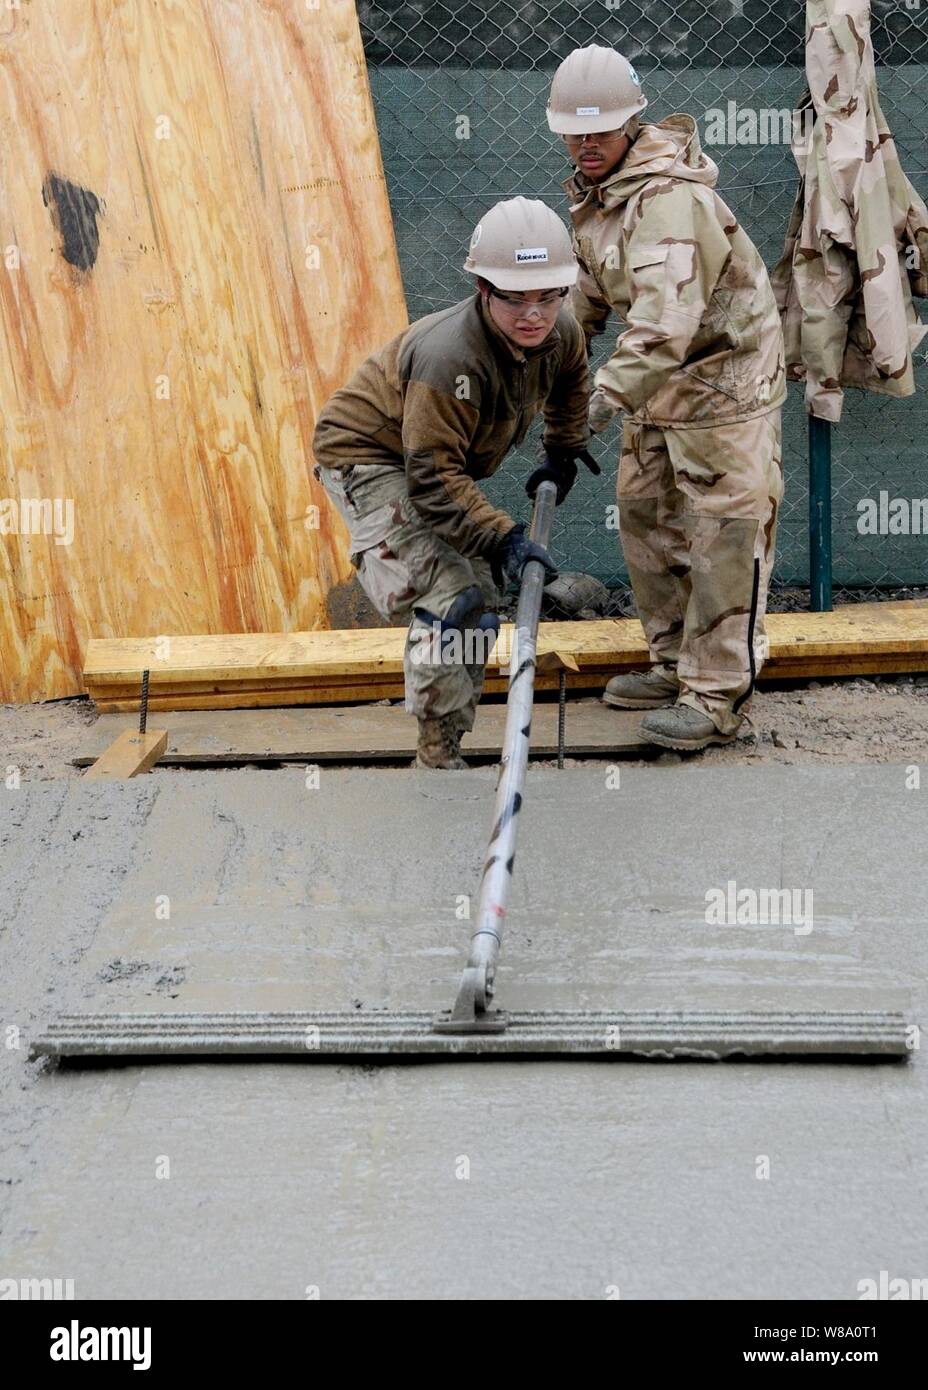 Petty Officer Selina Rodriguez, assigned to Naval Mobile Construction Battalion 7, uses a bull float to finish concrete at Kandahar Airfield on Feb. 17, 2012.  Naval Mobile Construction Battalion 7 and its detachments are one of two Seabee battalions supporting the International Security Assistance Force as part of Task Force Stethem, operating in the U.S. Central Command area of responsibility. Stock Photo